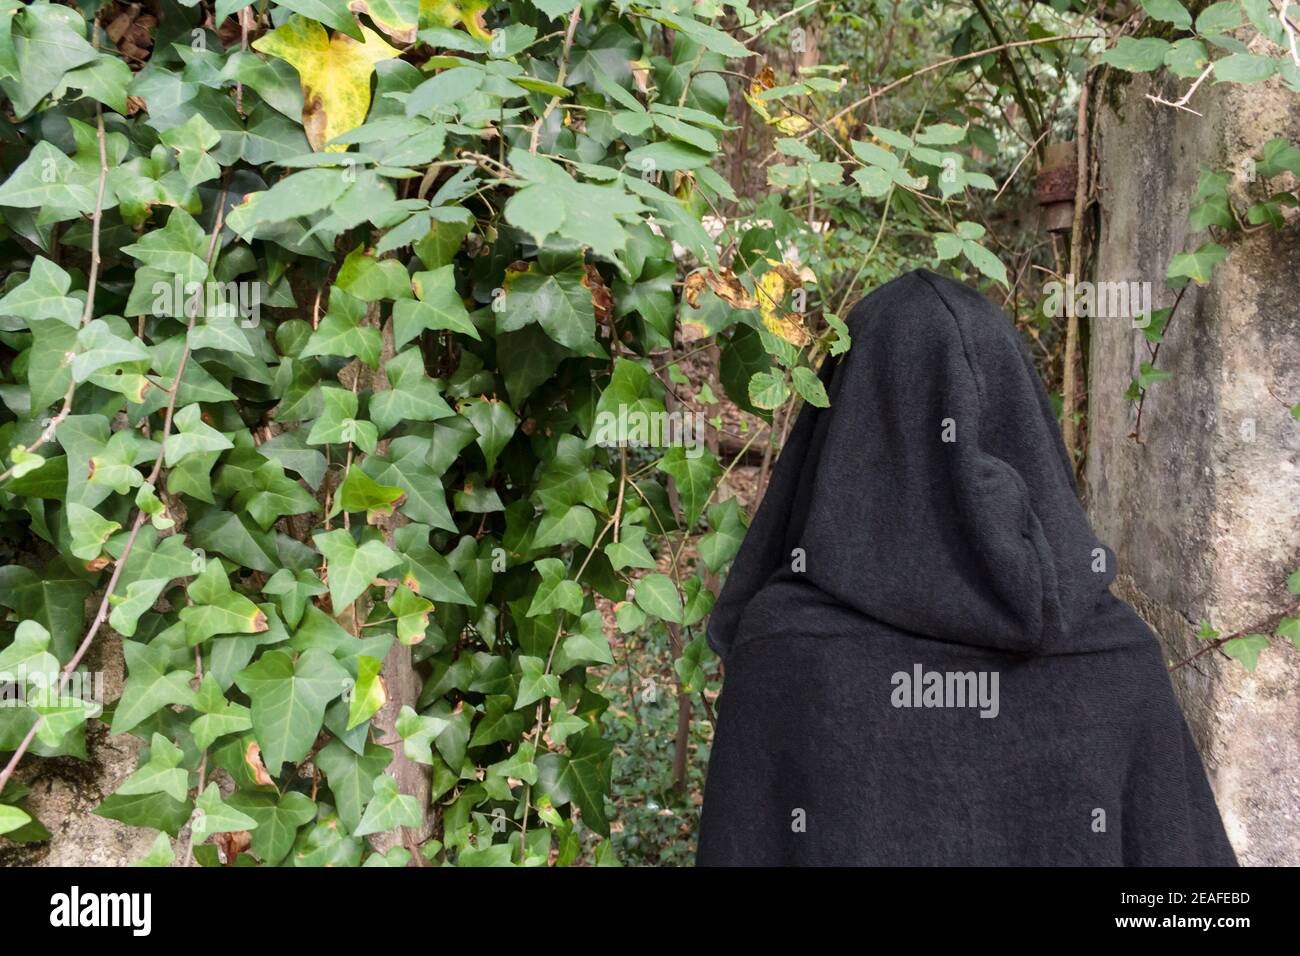 Rear view of woman with black cloak with hood in ruined building Stock Photo